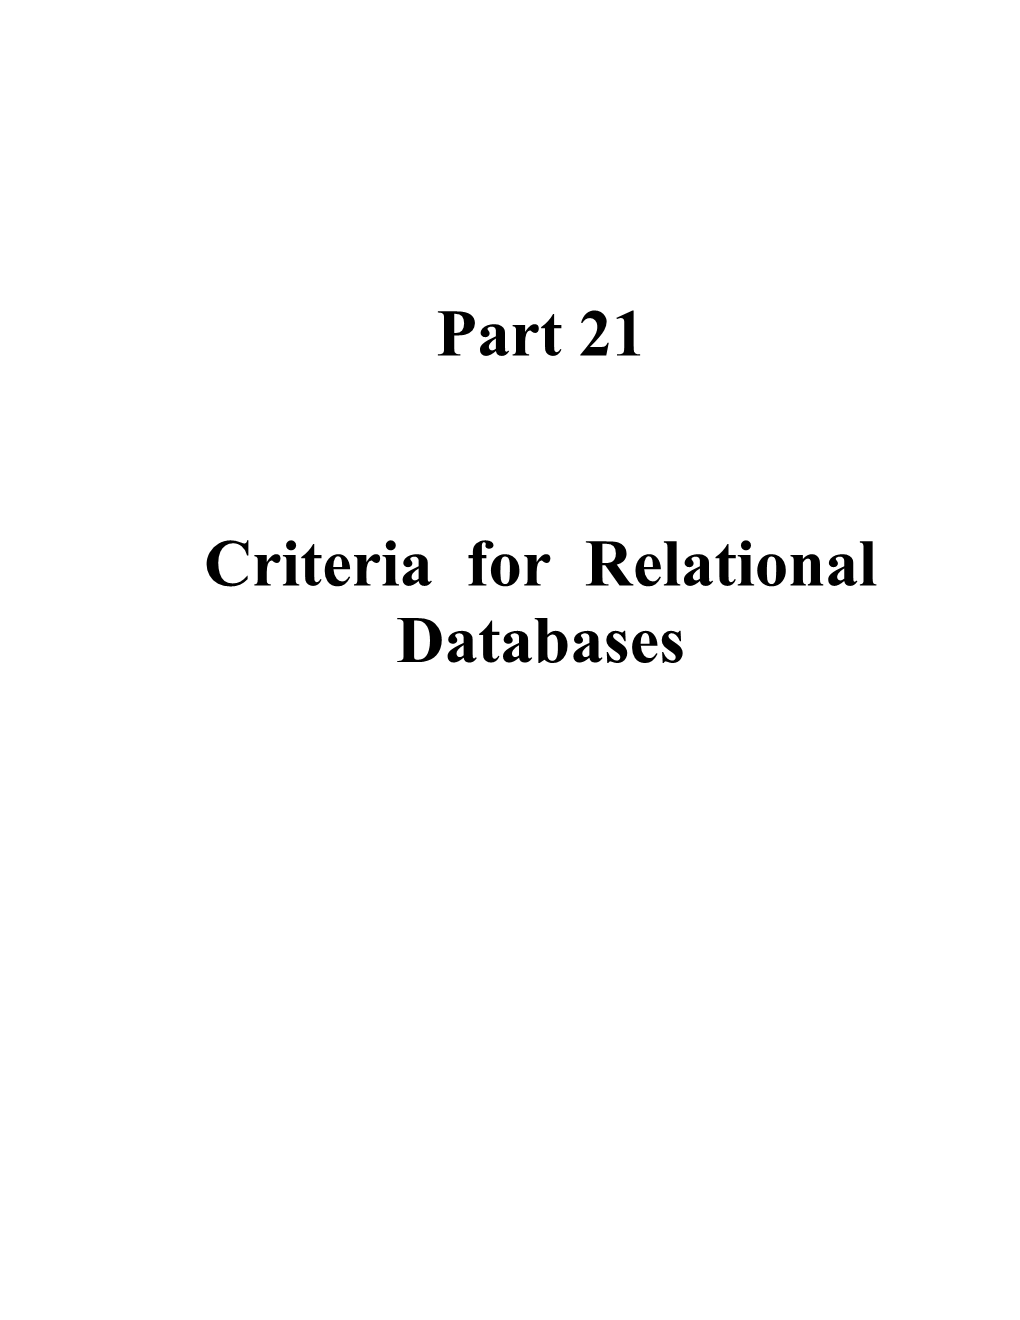 Part 21 - Criteria for Relational Databases